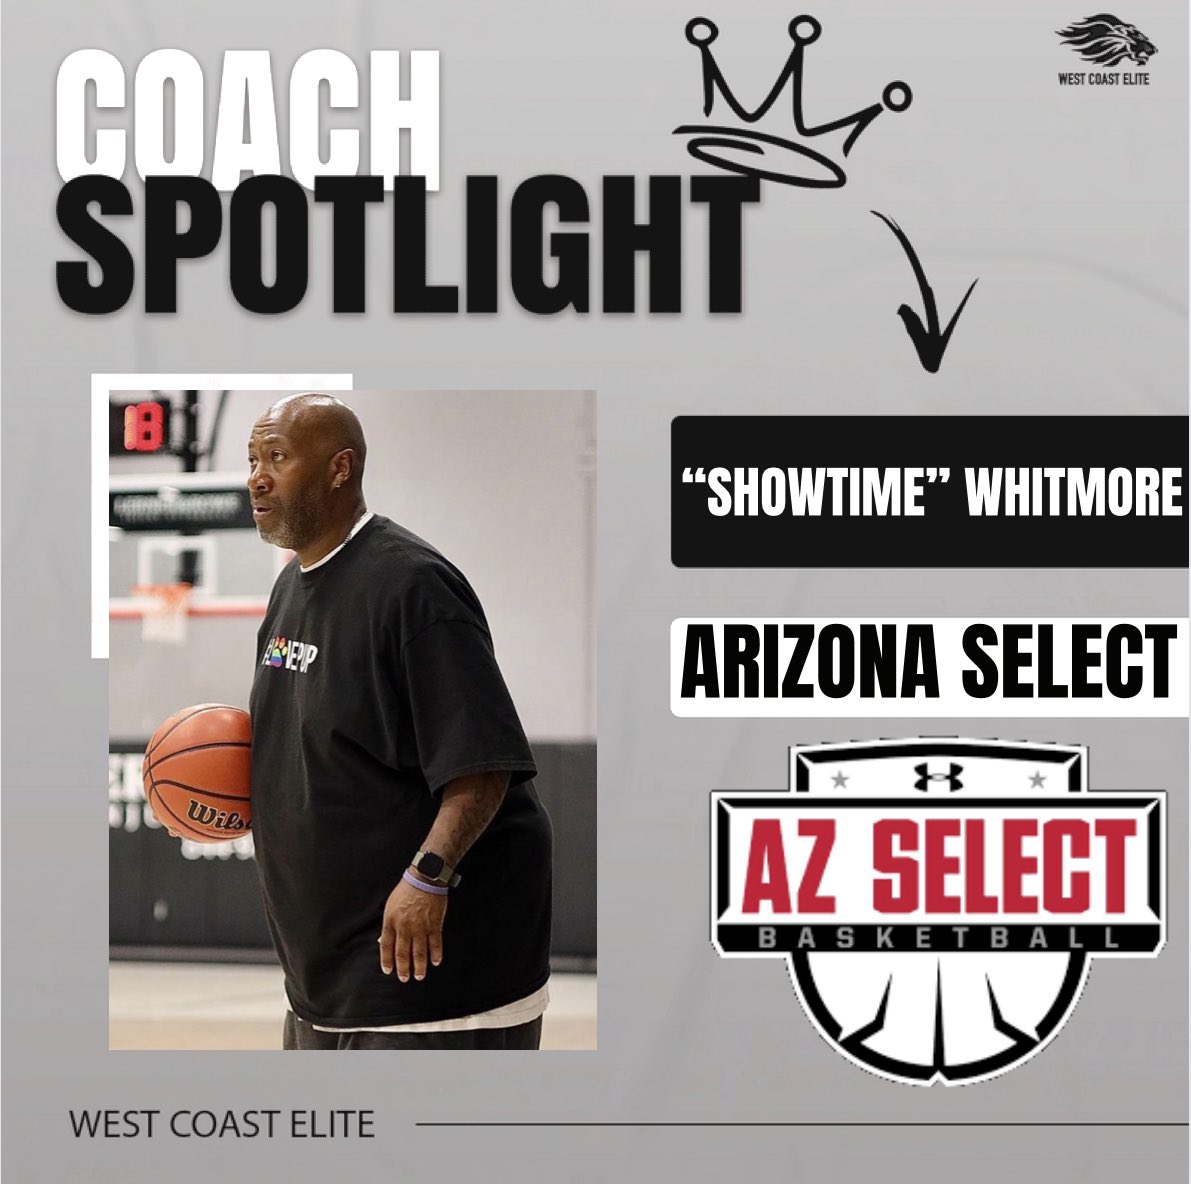 #CoachSpotlight

Coach Show has been helping build the Arizona Select brand for quite some time. Well liked by the kids, connected, passionate, and a guy that is always putting the time in. One of John Ortega’s most valuable assets and best hires down in Phoenix, AZ

🏀🔥